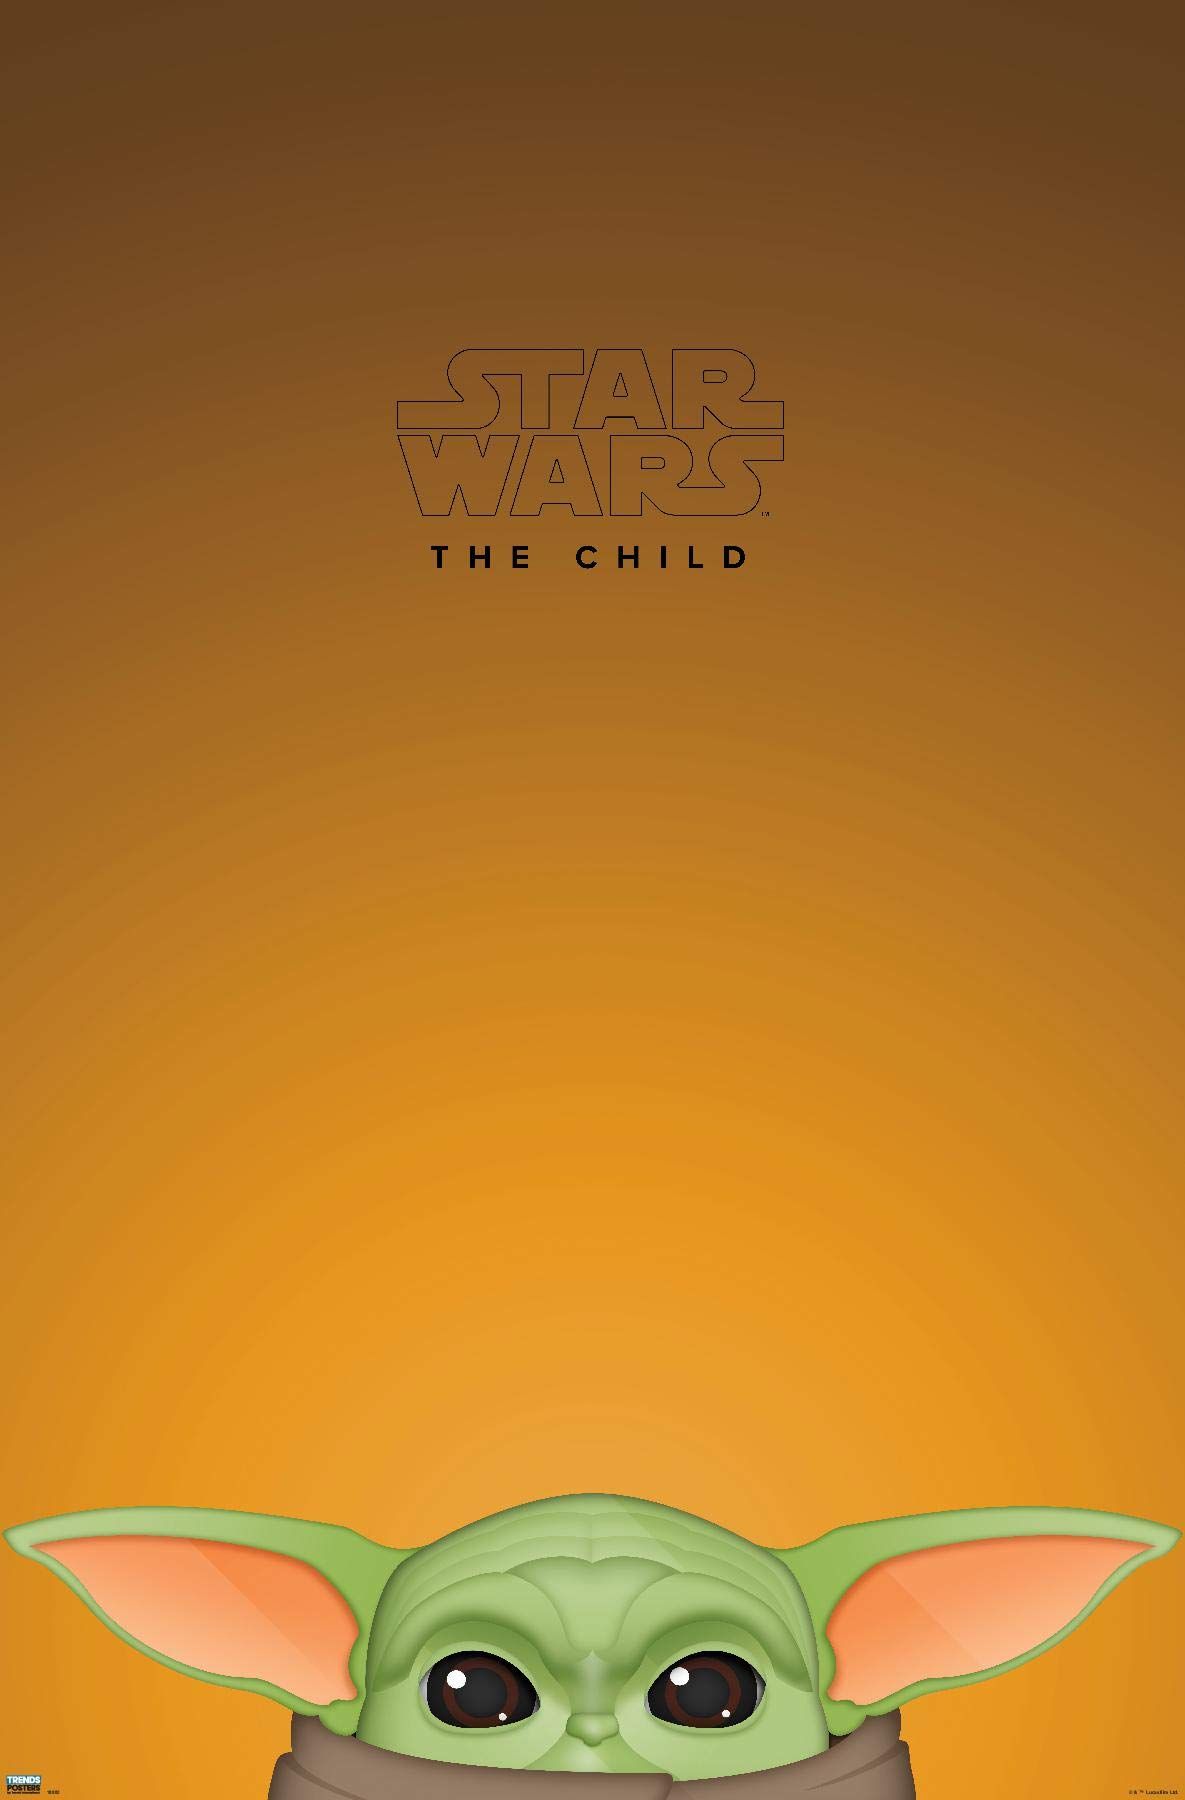 Star Wars The Child iPhone Wallpaper with high-resolution 1080x1920 pixel. You can use this wallpaper for your iPhone 5, 6, 7, 8, X, XS, XR backgrounds, Mobile Screensaver, or iPad Lock Screen - Baby Yoda